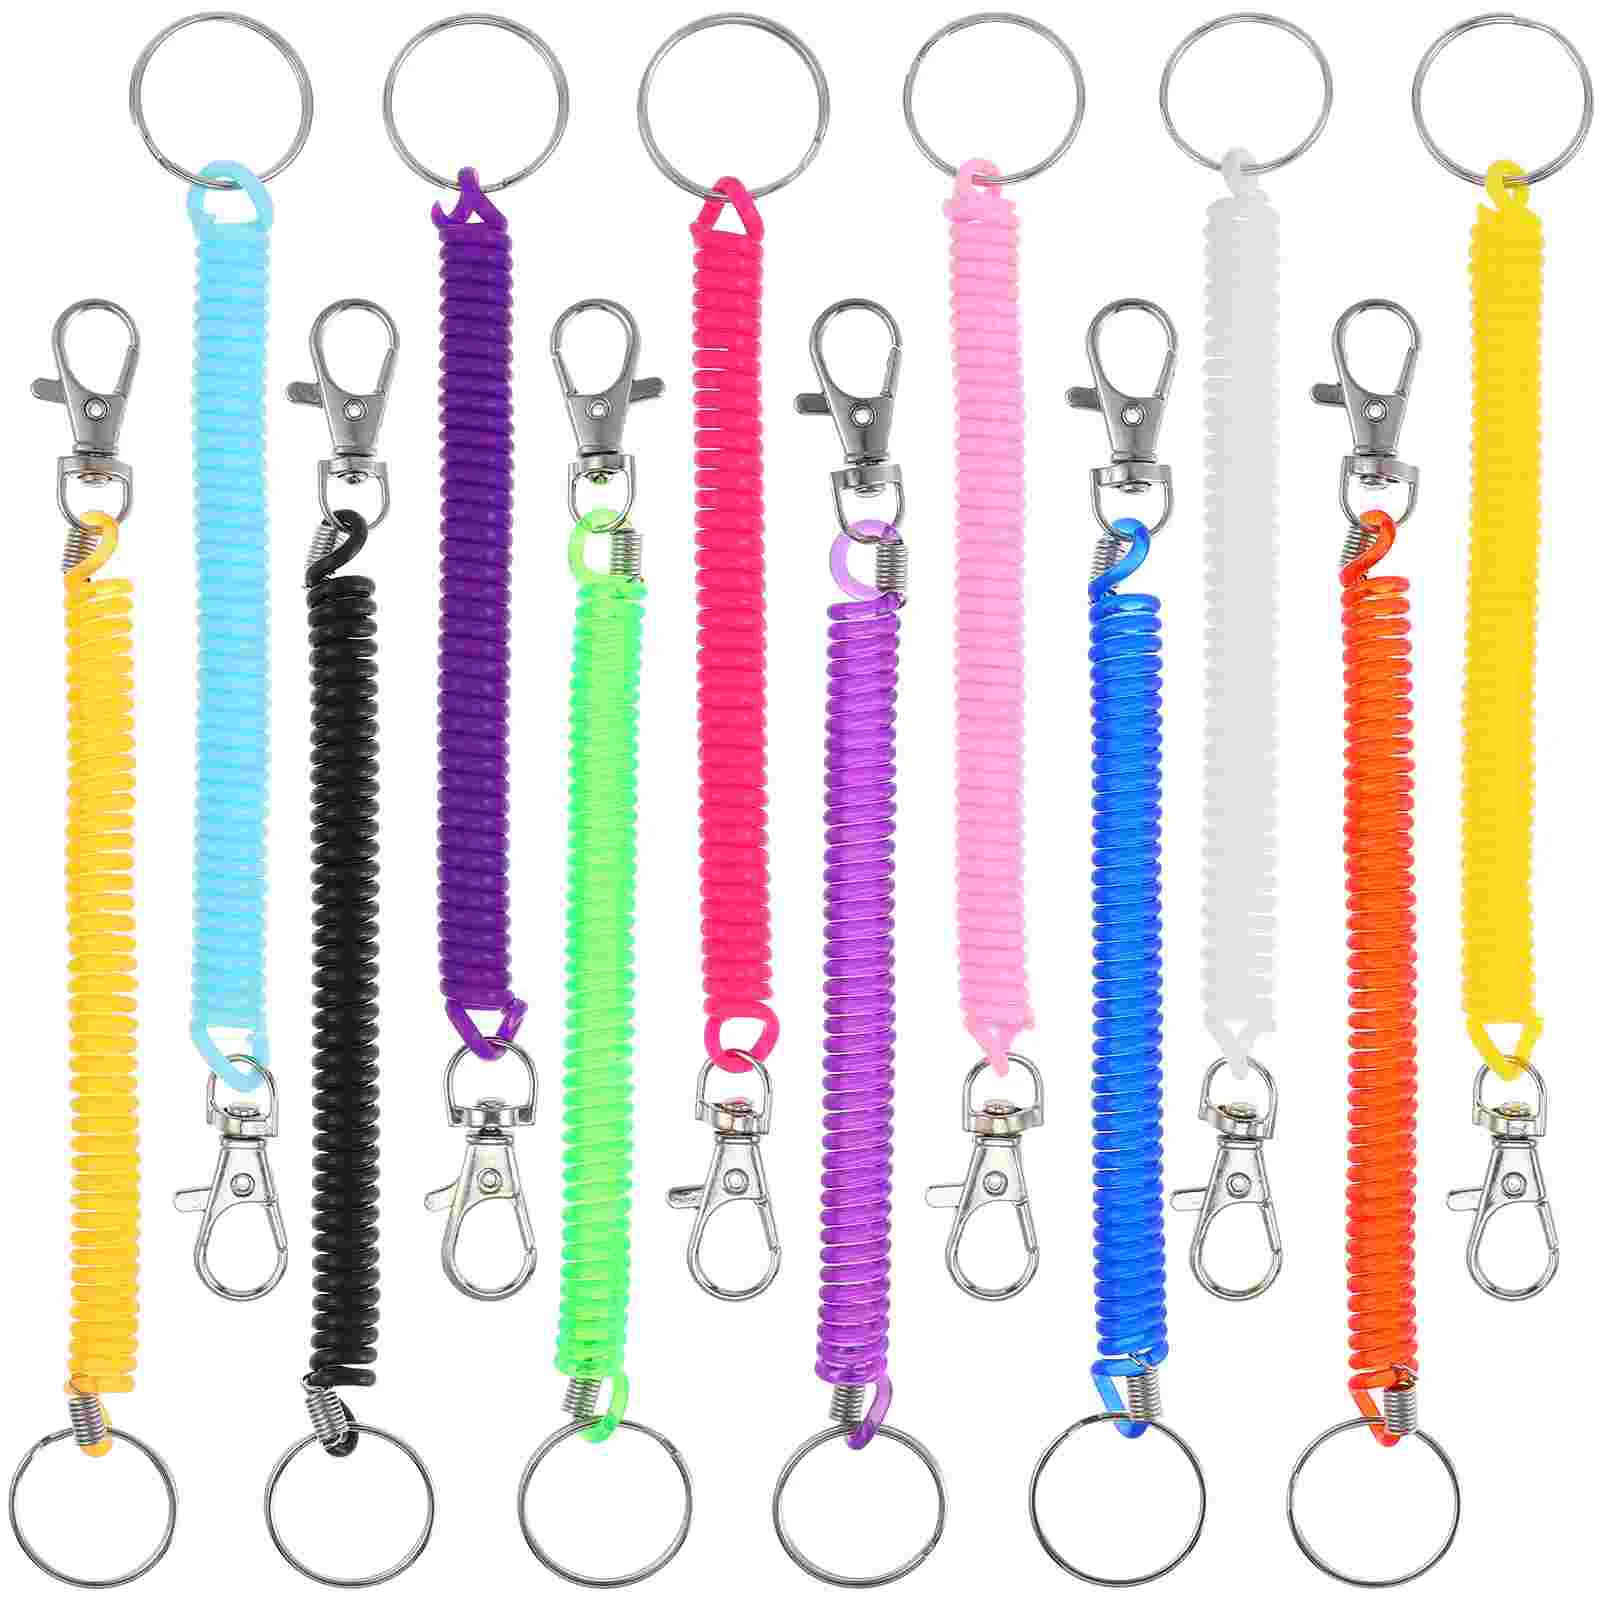 

Keyrings Spiral Colourful Stretchy Retractable Key Holder Spring Keyring Plastic Keychain for Gift Present Souvenir